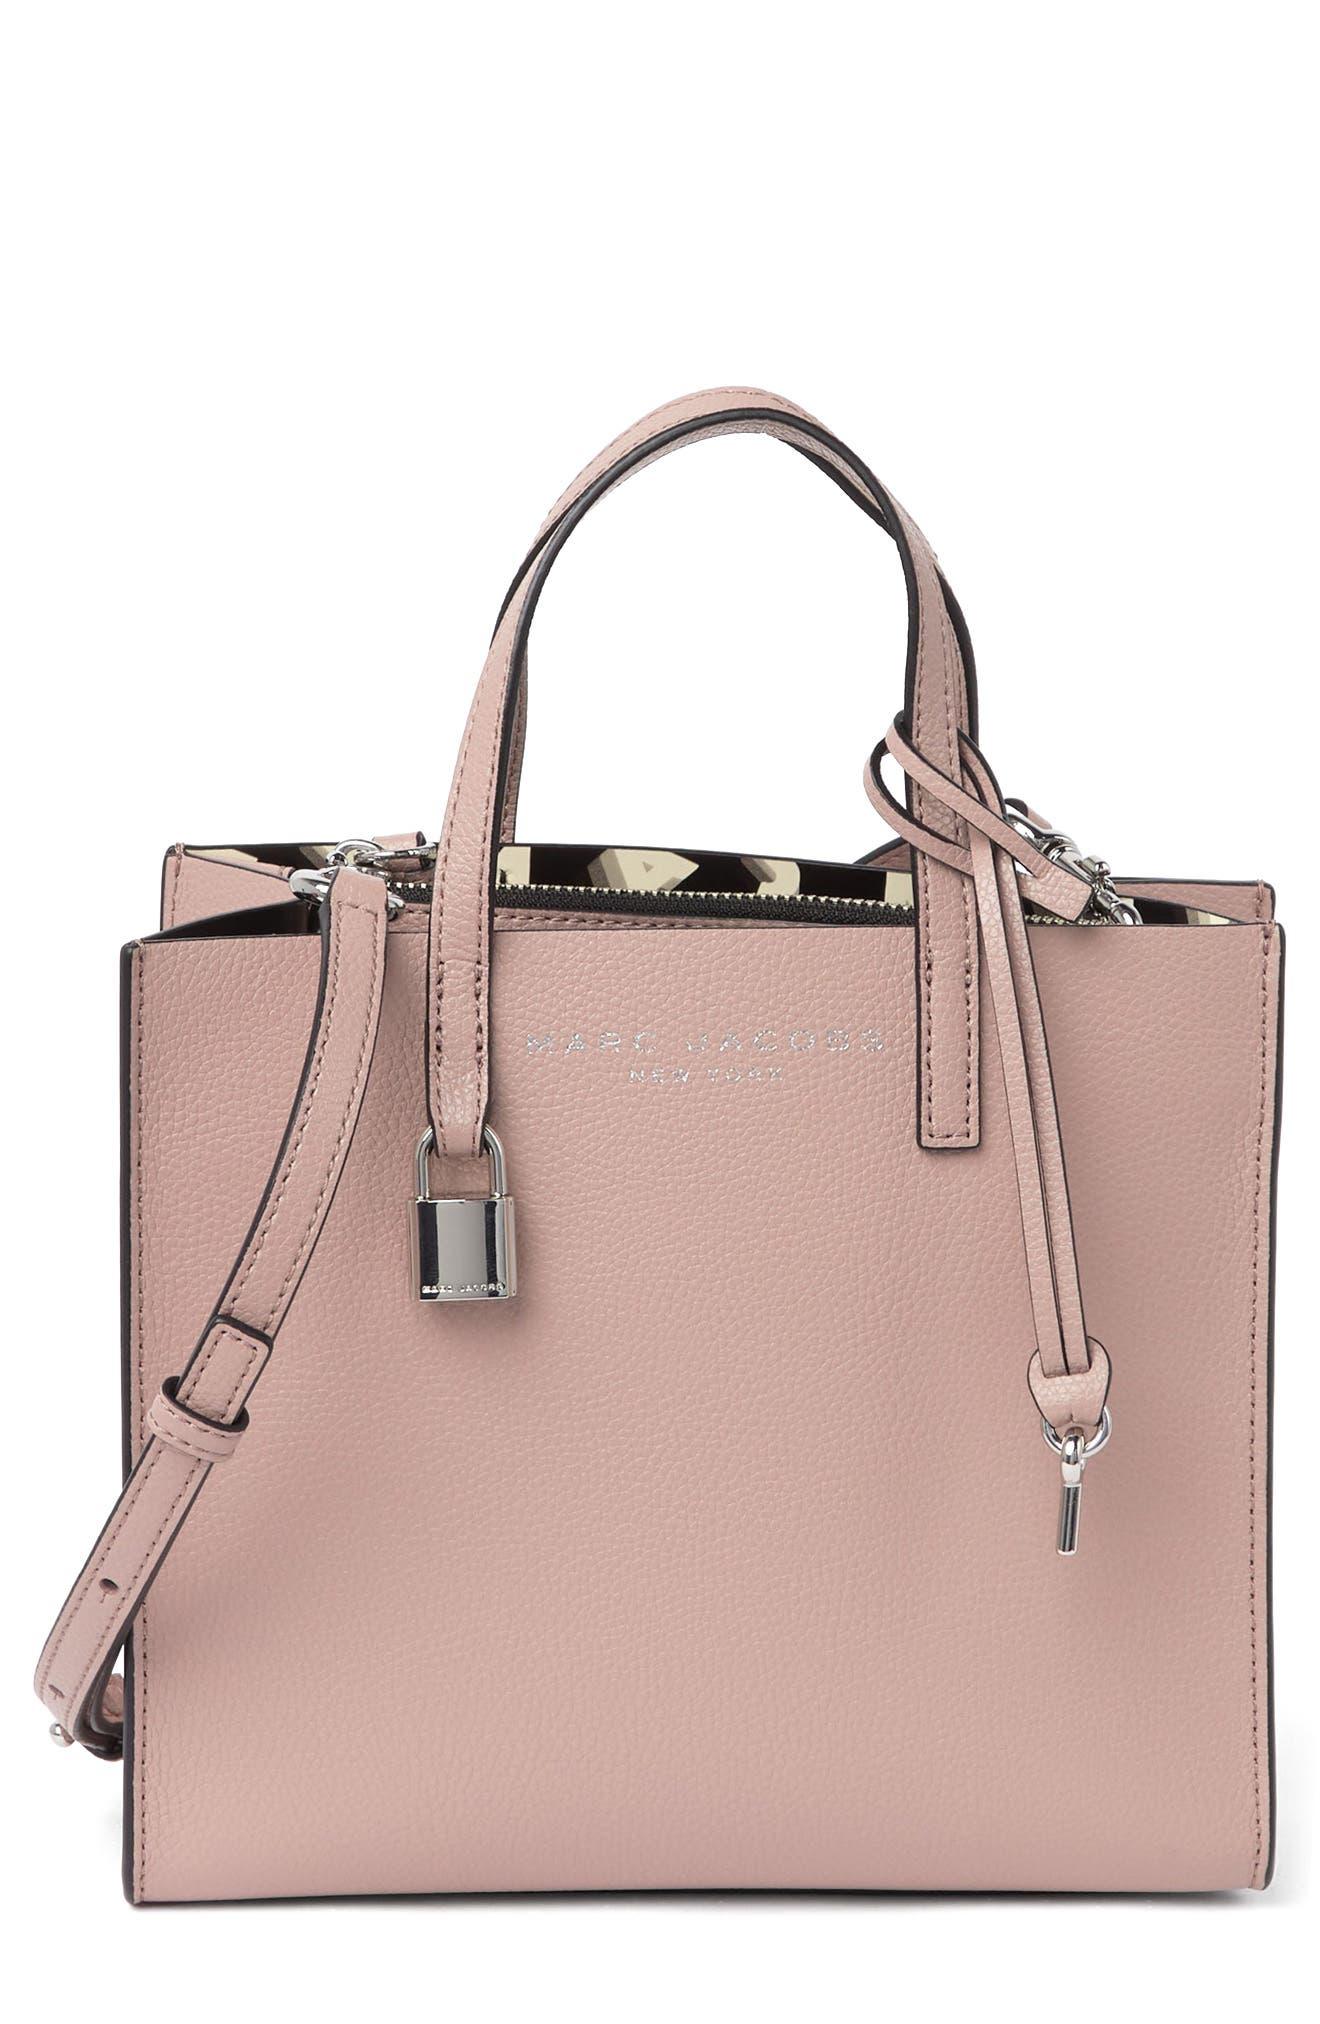 Marc Jacobs Mini Grind Coated Leather Tote In Romantic Beige At Nordstrom  Rack - Lyst